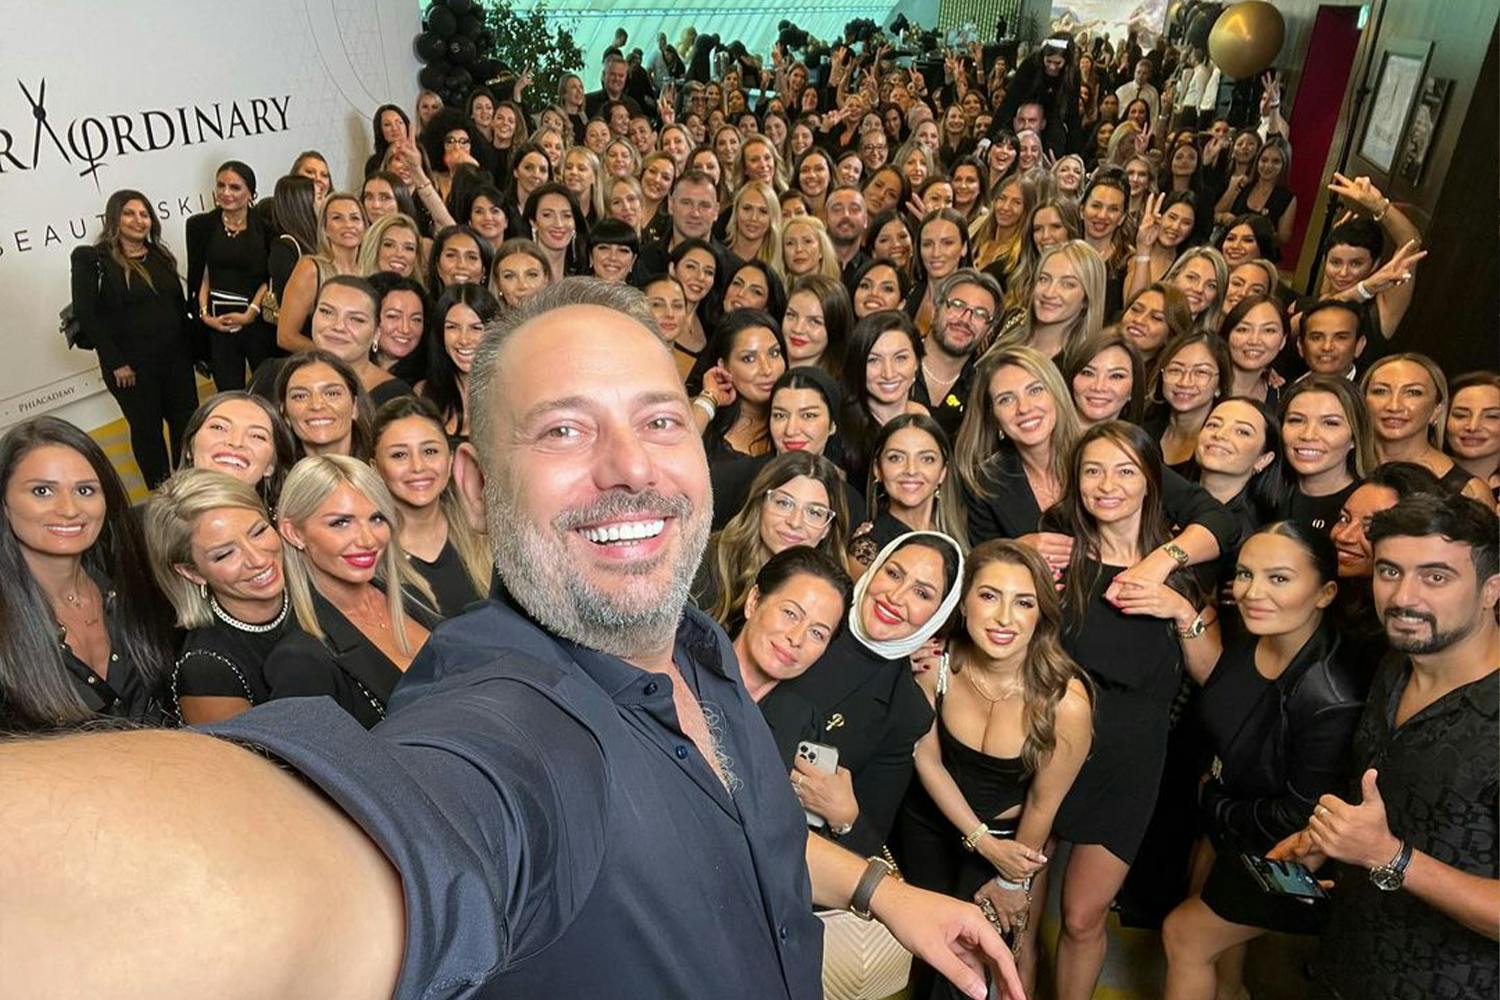 PhiAcademy is the largest academy for microblading and permanent makeup on earth, and is proud to train the the best beauty artists in the world